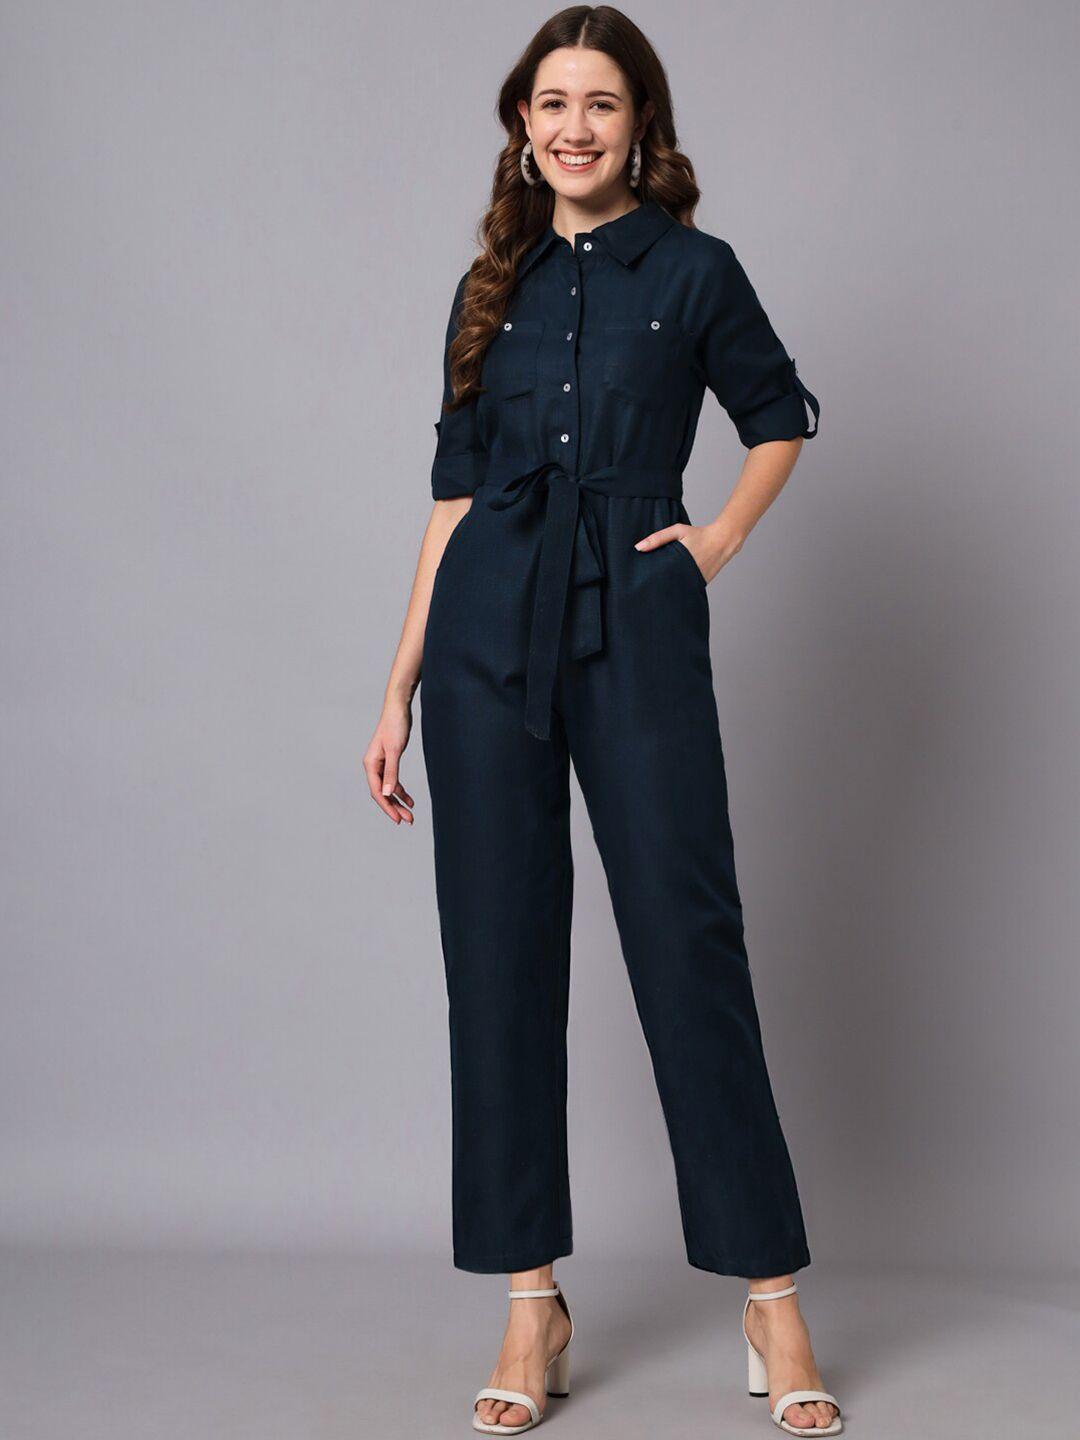 the-dry-state-waist-tie-up-basic-jumpsuit